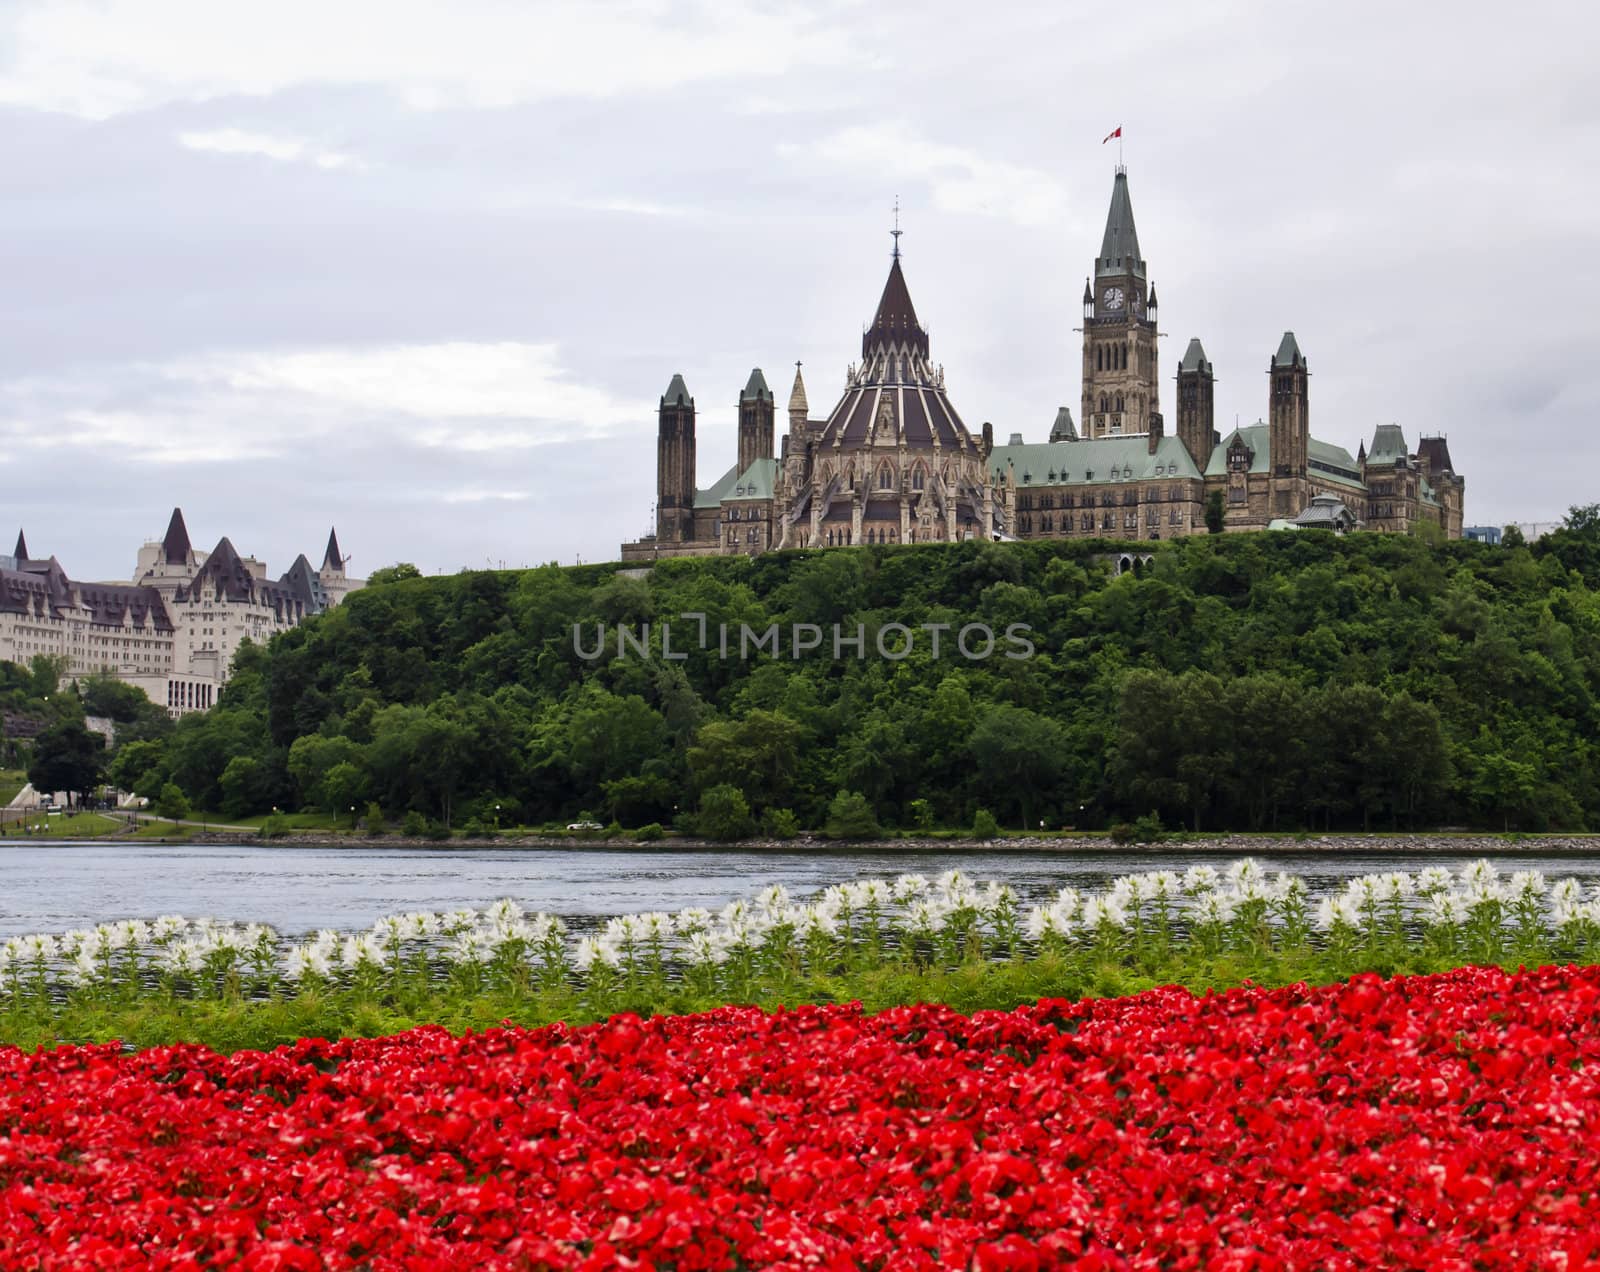 The Canadian Parliament with red and white flowers across the river in Gatineau.